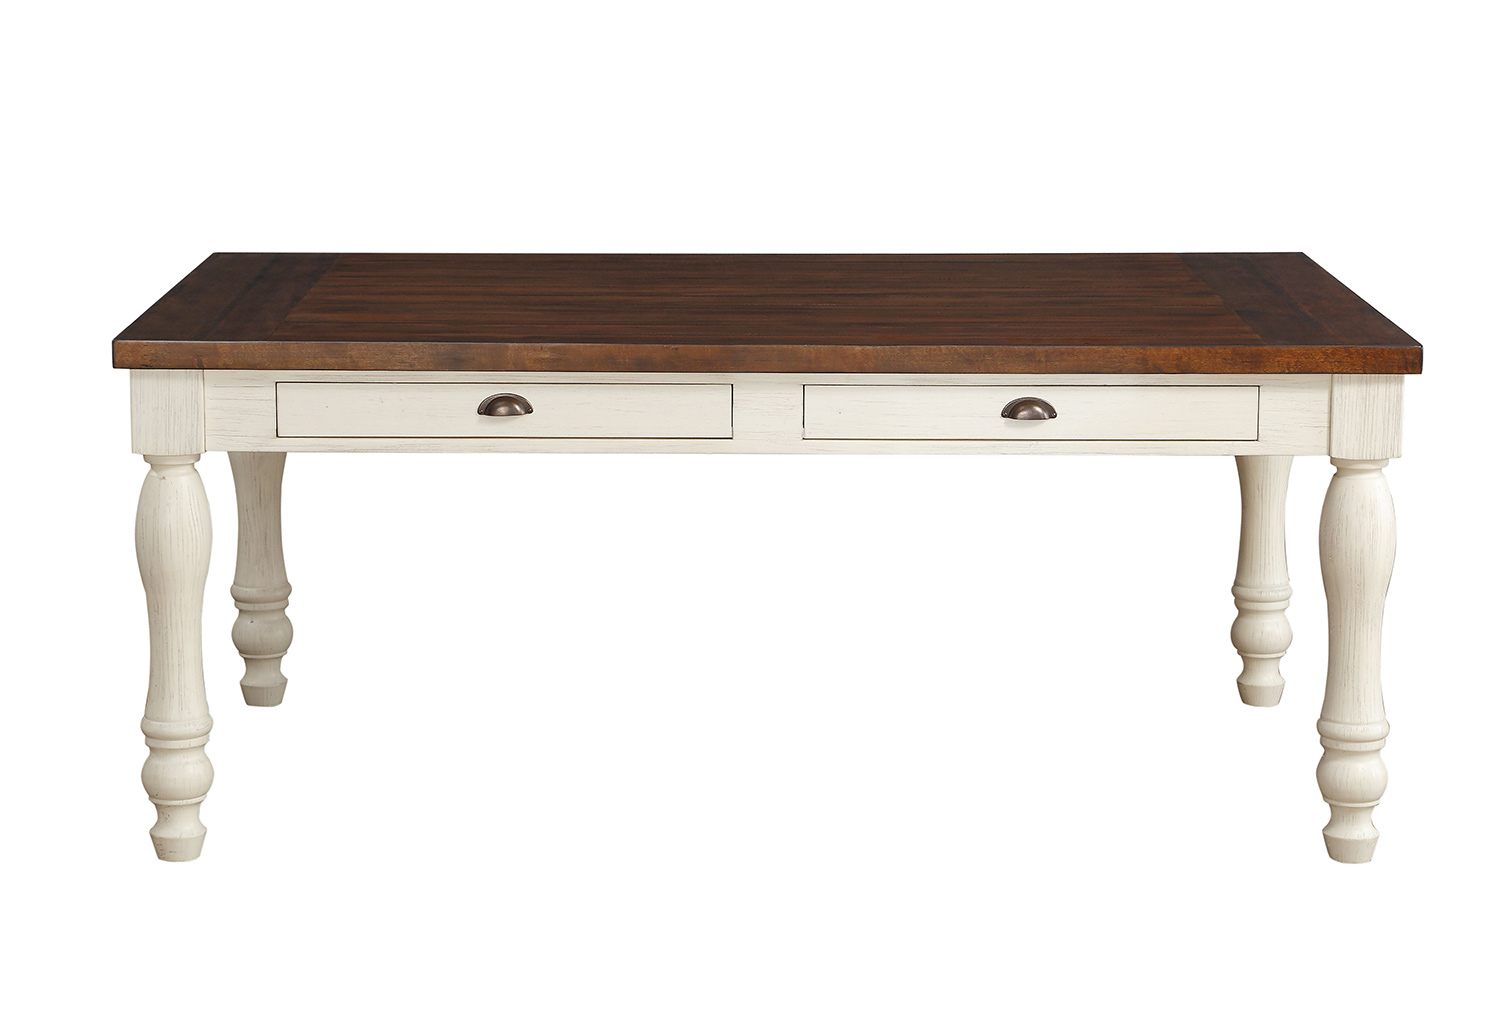 Acme Britta Dining Table - Walnut/White Washed